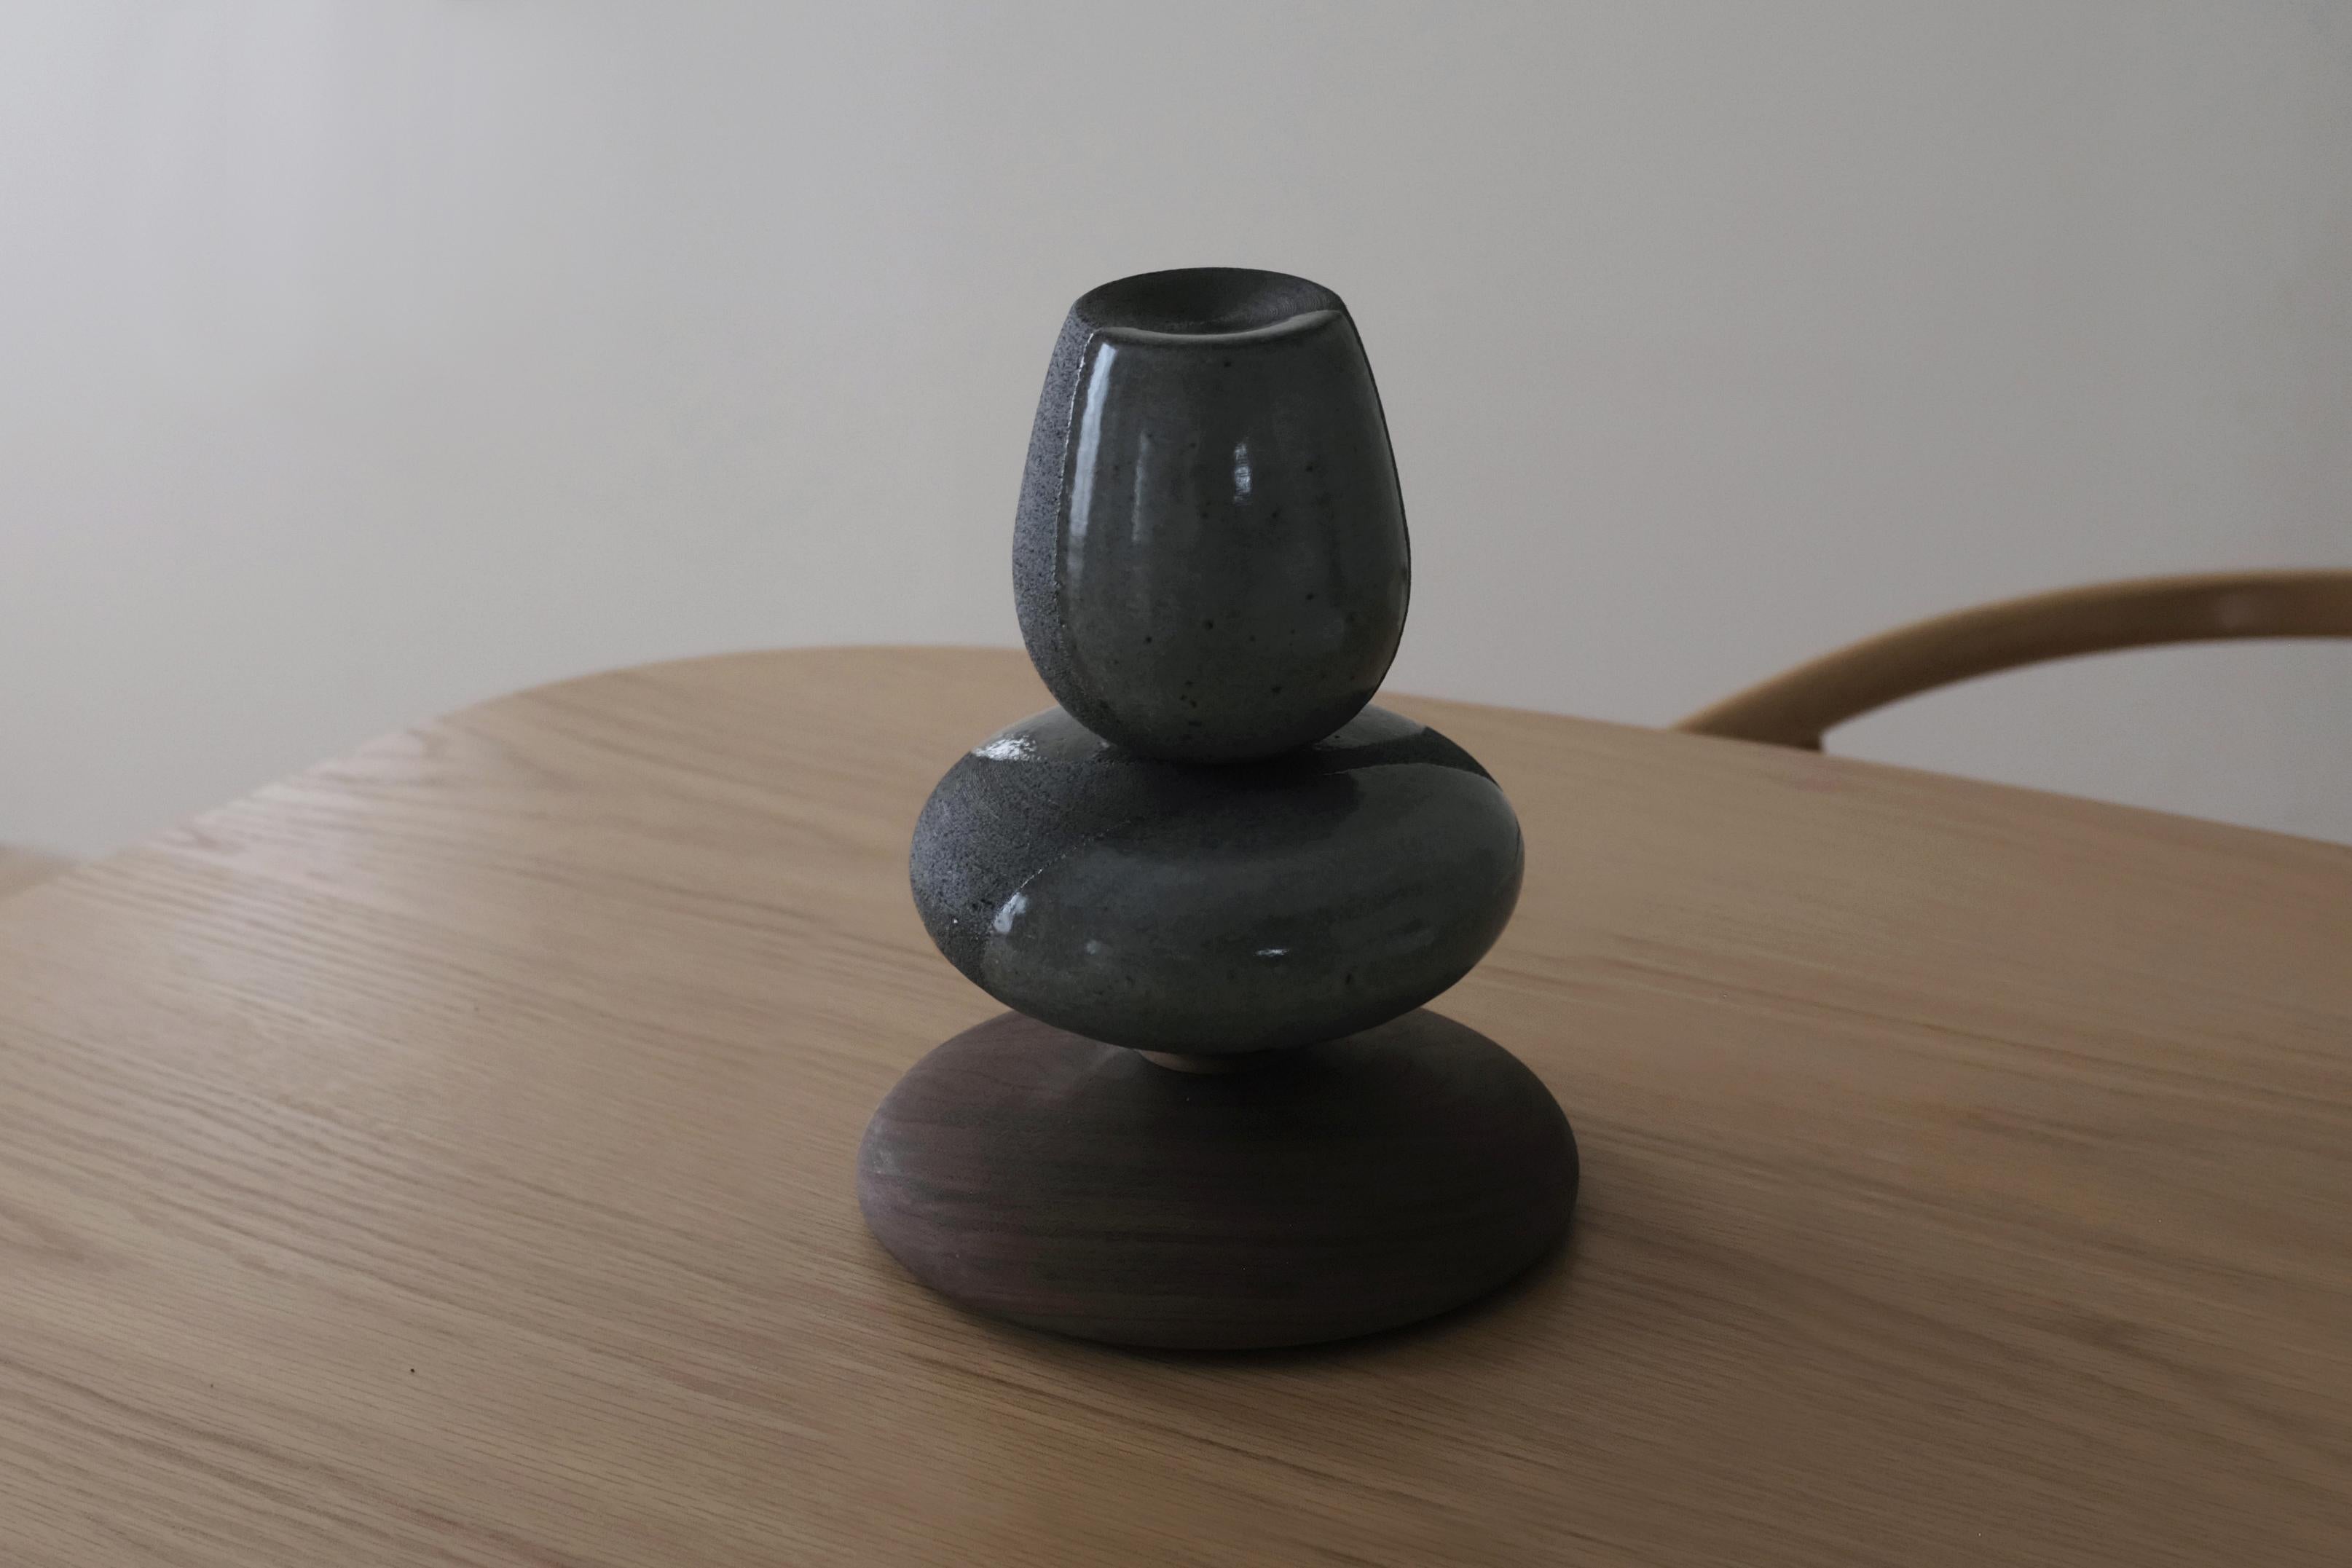 Stack Sculpture is a small table sculpture in a dark stoneware with celadon glaze, on a walnut wooden base. These small stack sculptures are a contemporary iteration of traditional Korean aesthetics by the artist Soo Joo, and they bring a sense of